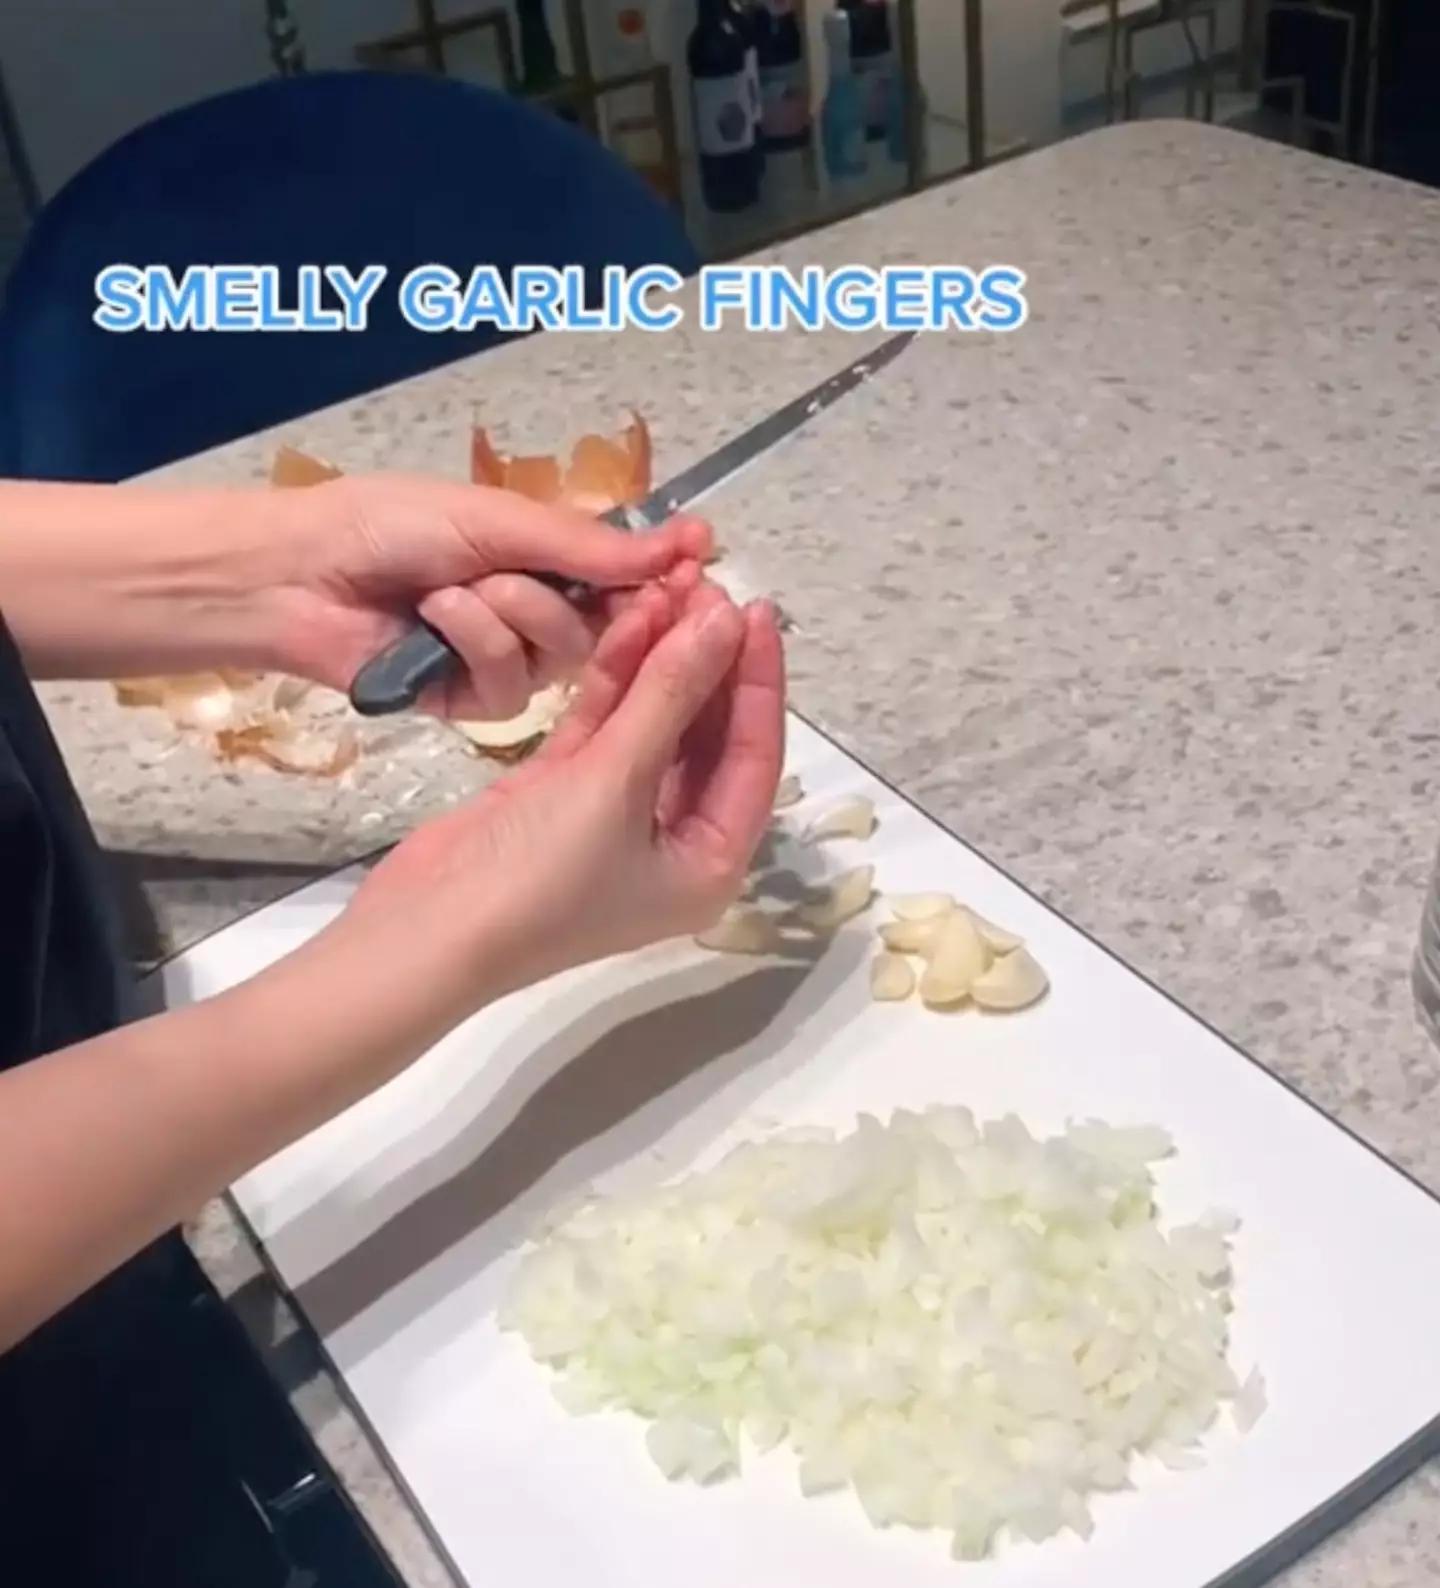 Nobody needs smelly garlic fingers in their life!